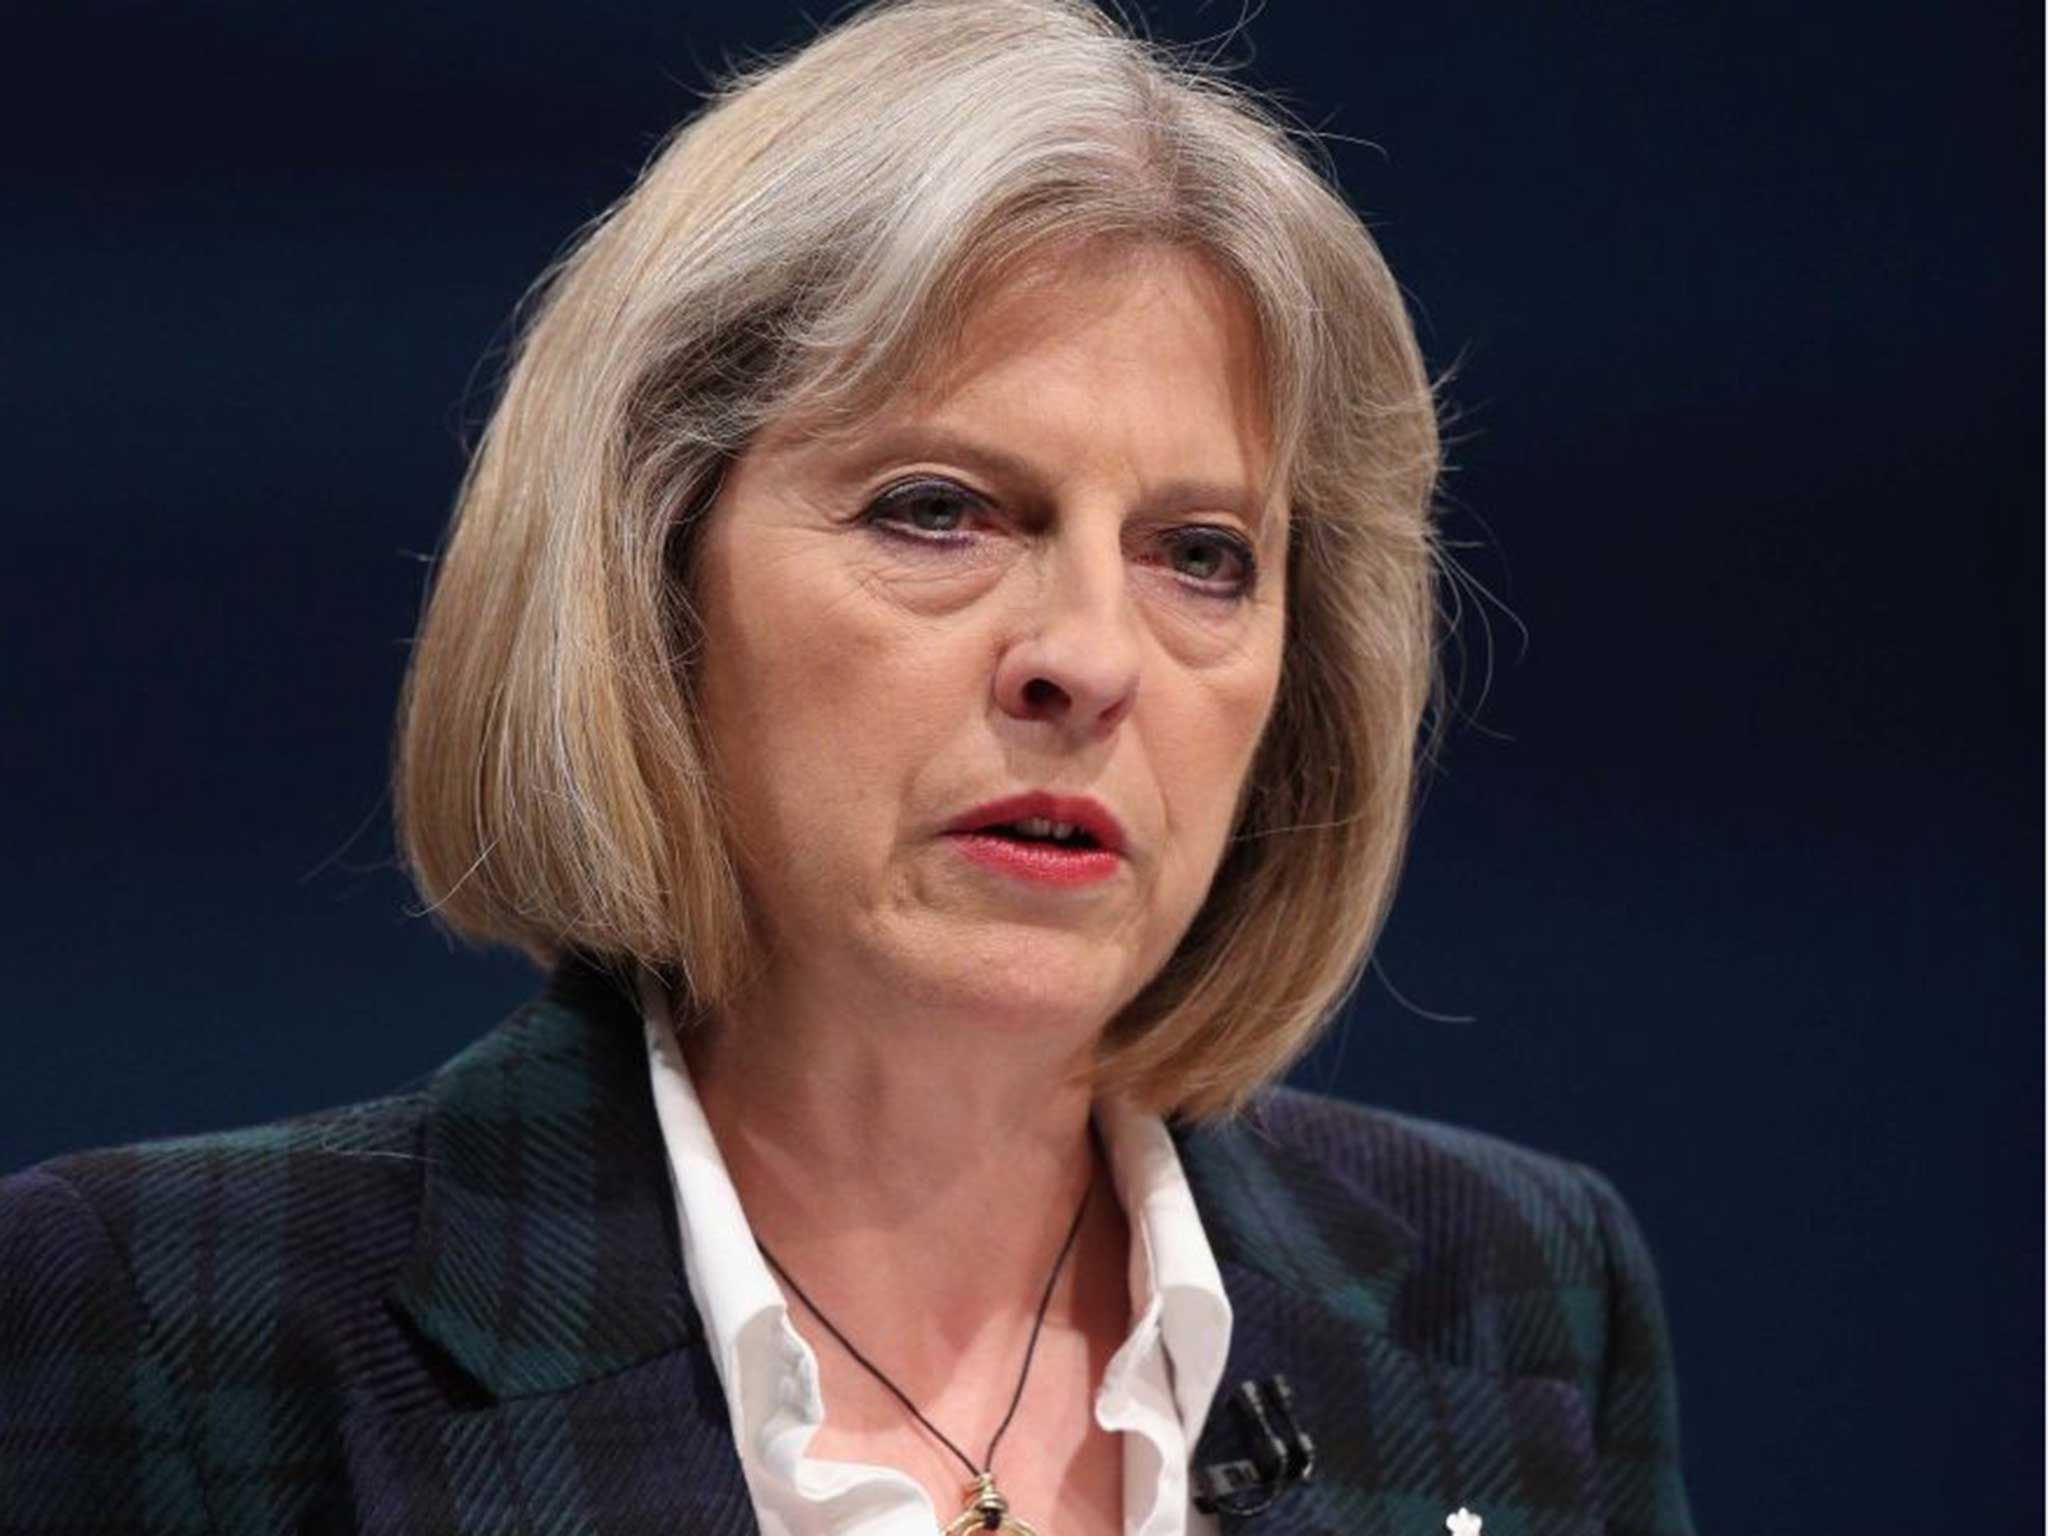 The Home Secretary said 'innocent lives may be lost' by delaying legislation